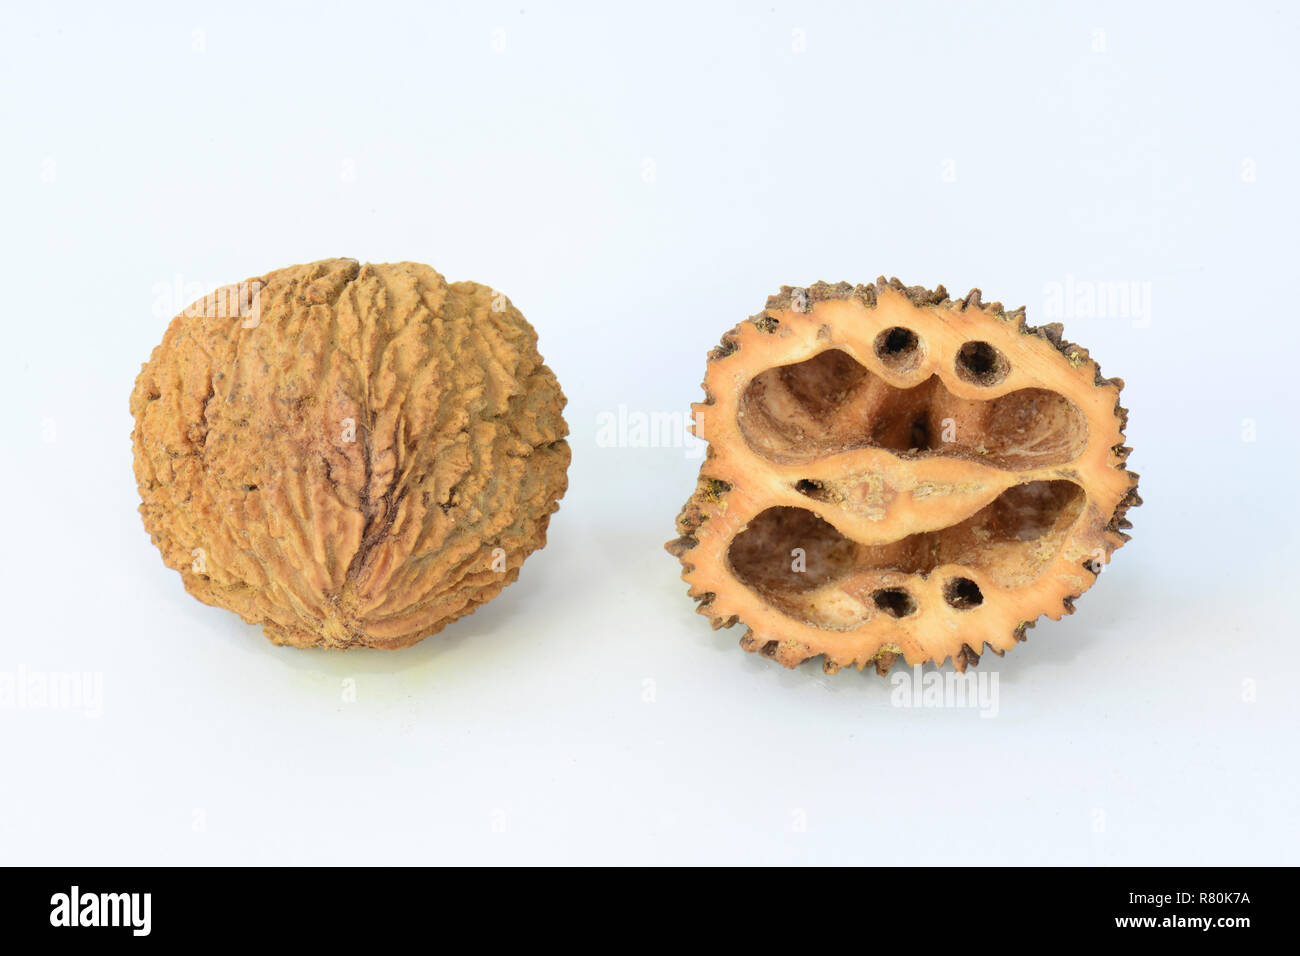 Black Walnut, American Walnut (Juglans nigra). Whole and halved nut, studio picture against a white background Stock Photo